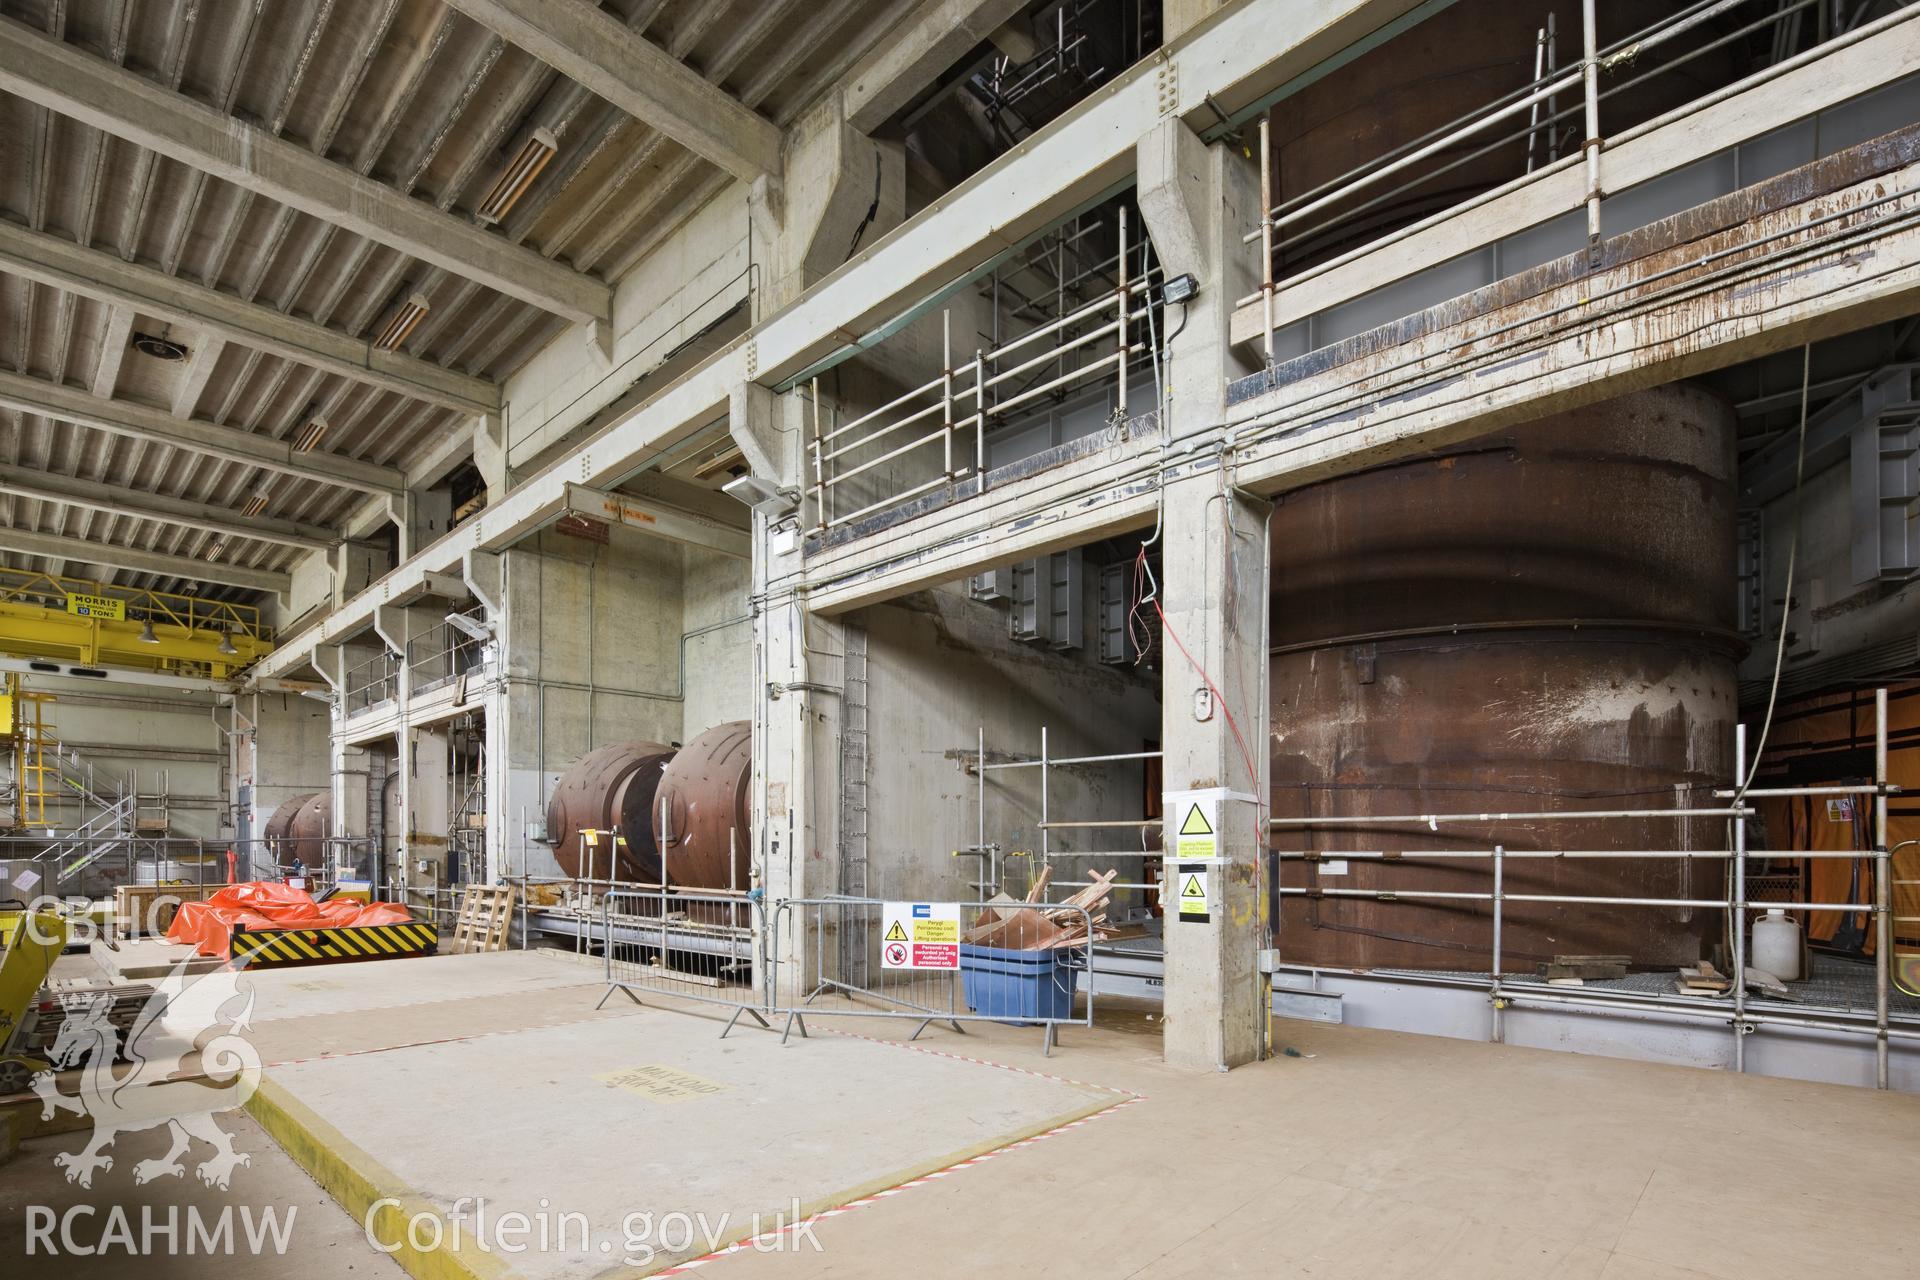 In the circ hall looking towards cut boiler sections.